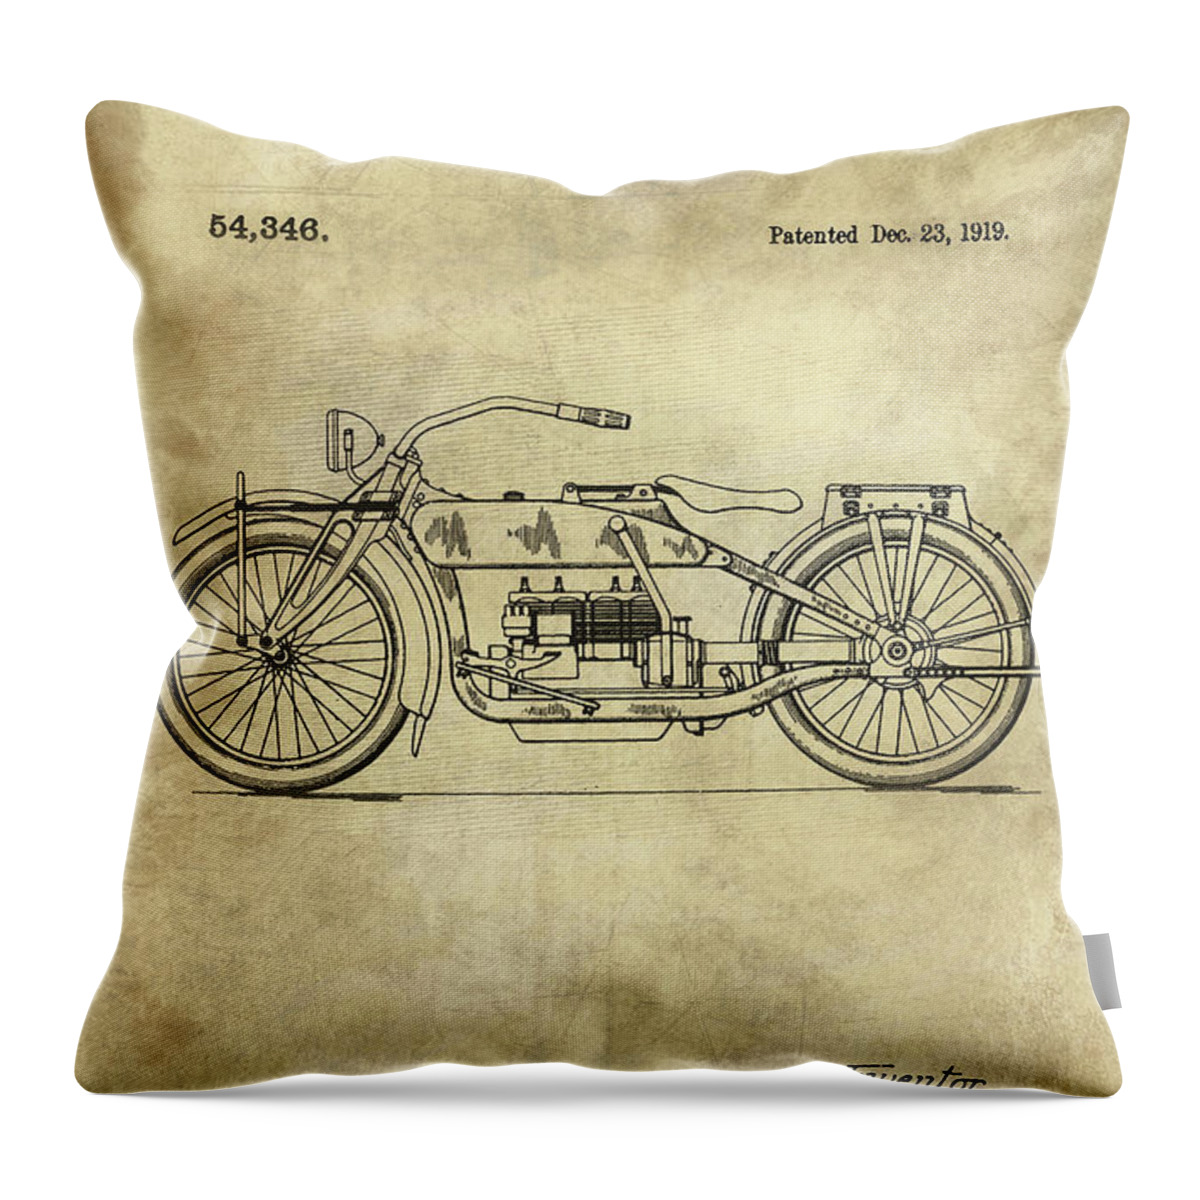 Retro Machine Motorcycle Patent Cushion Cover Industrial Decorative Pillow Case 